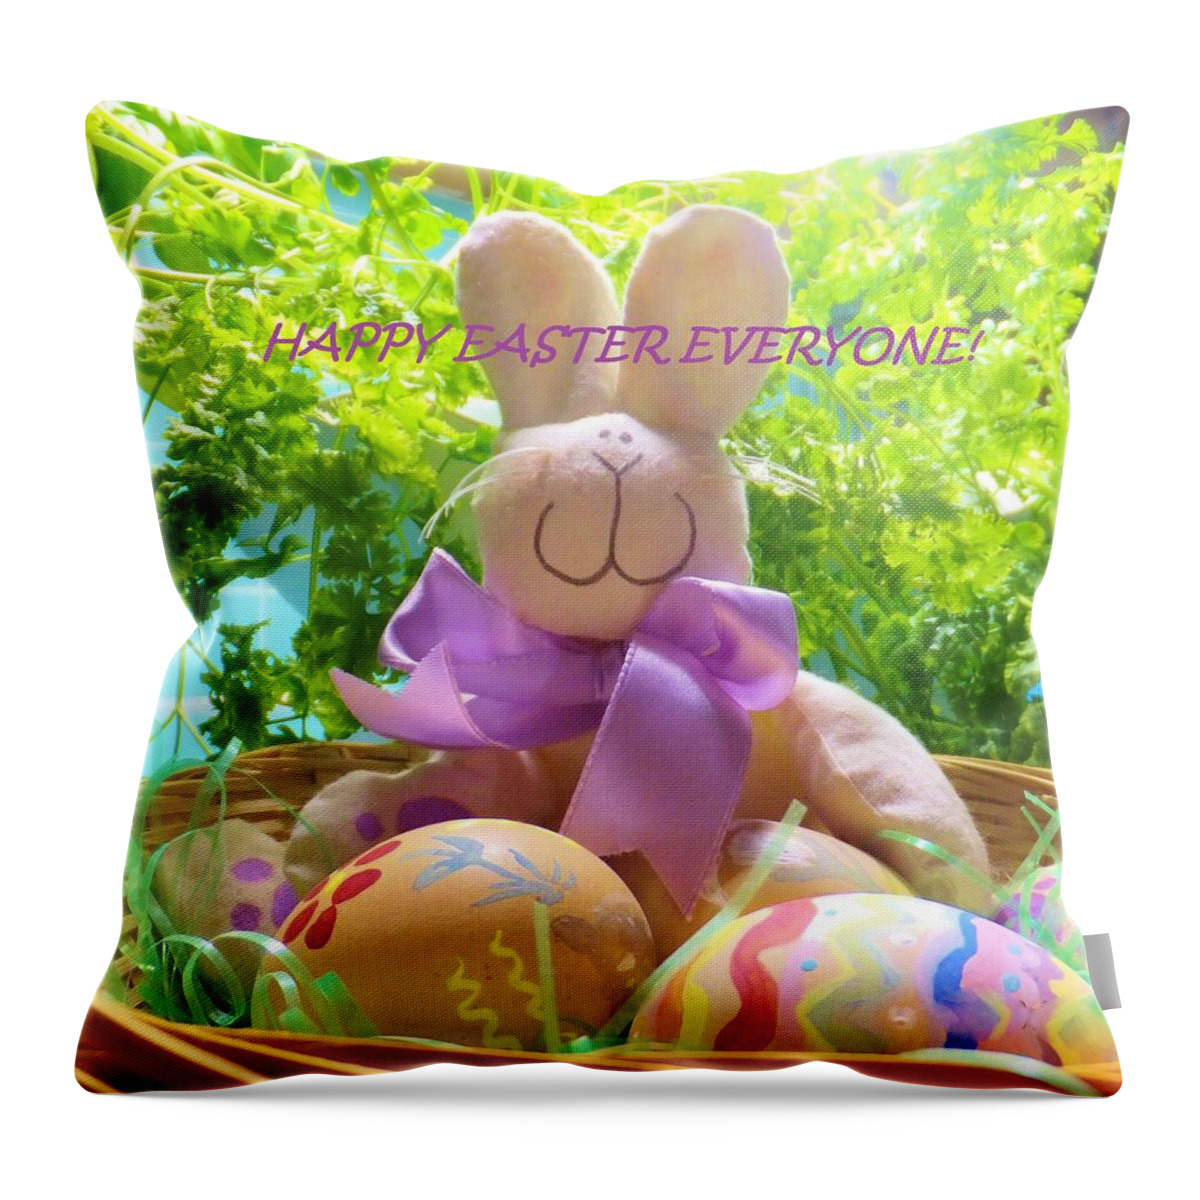 Bunny Throw Pillow featuring the photograph Happy Easter Everyone by Denise F Fulmer